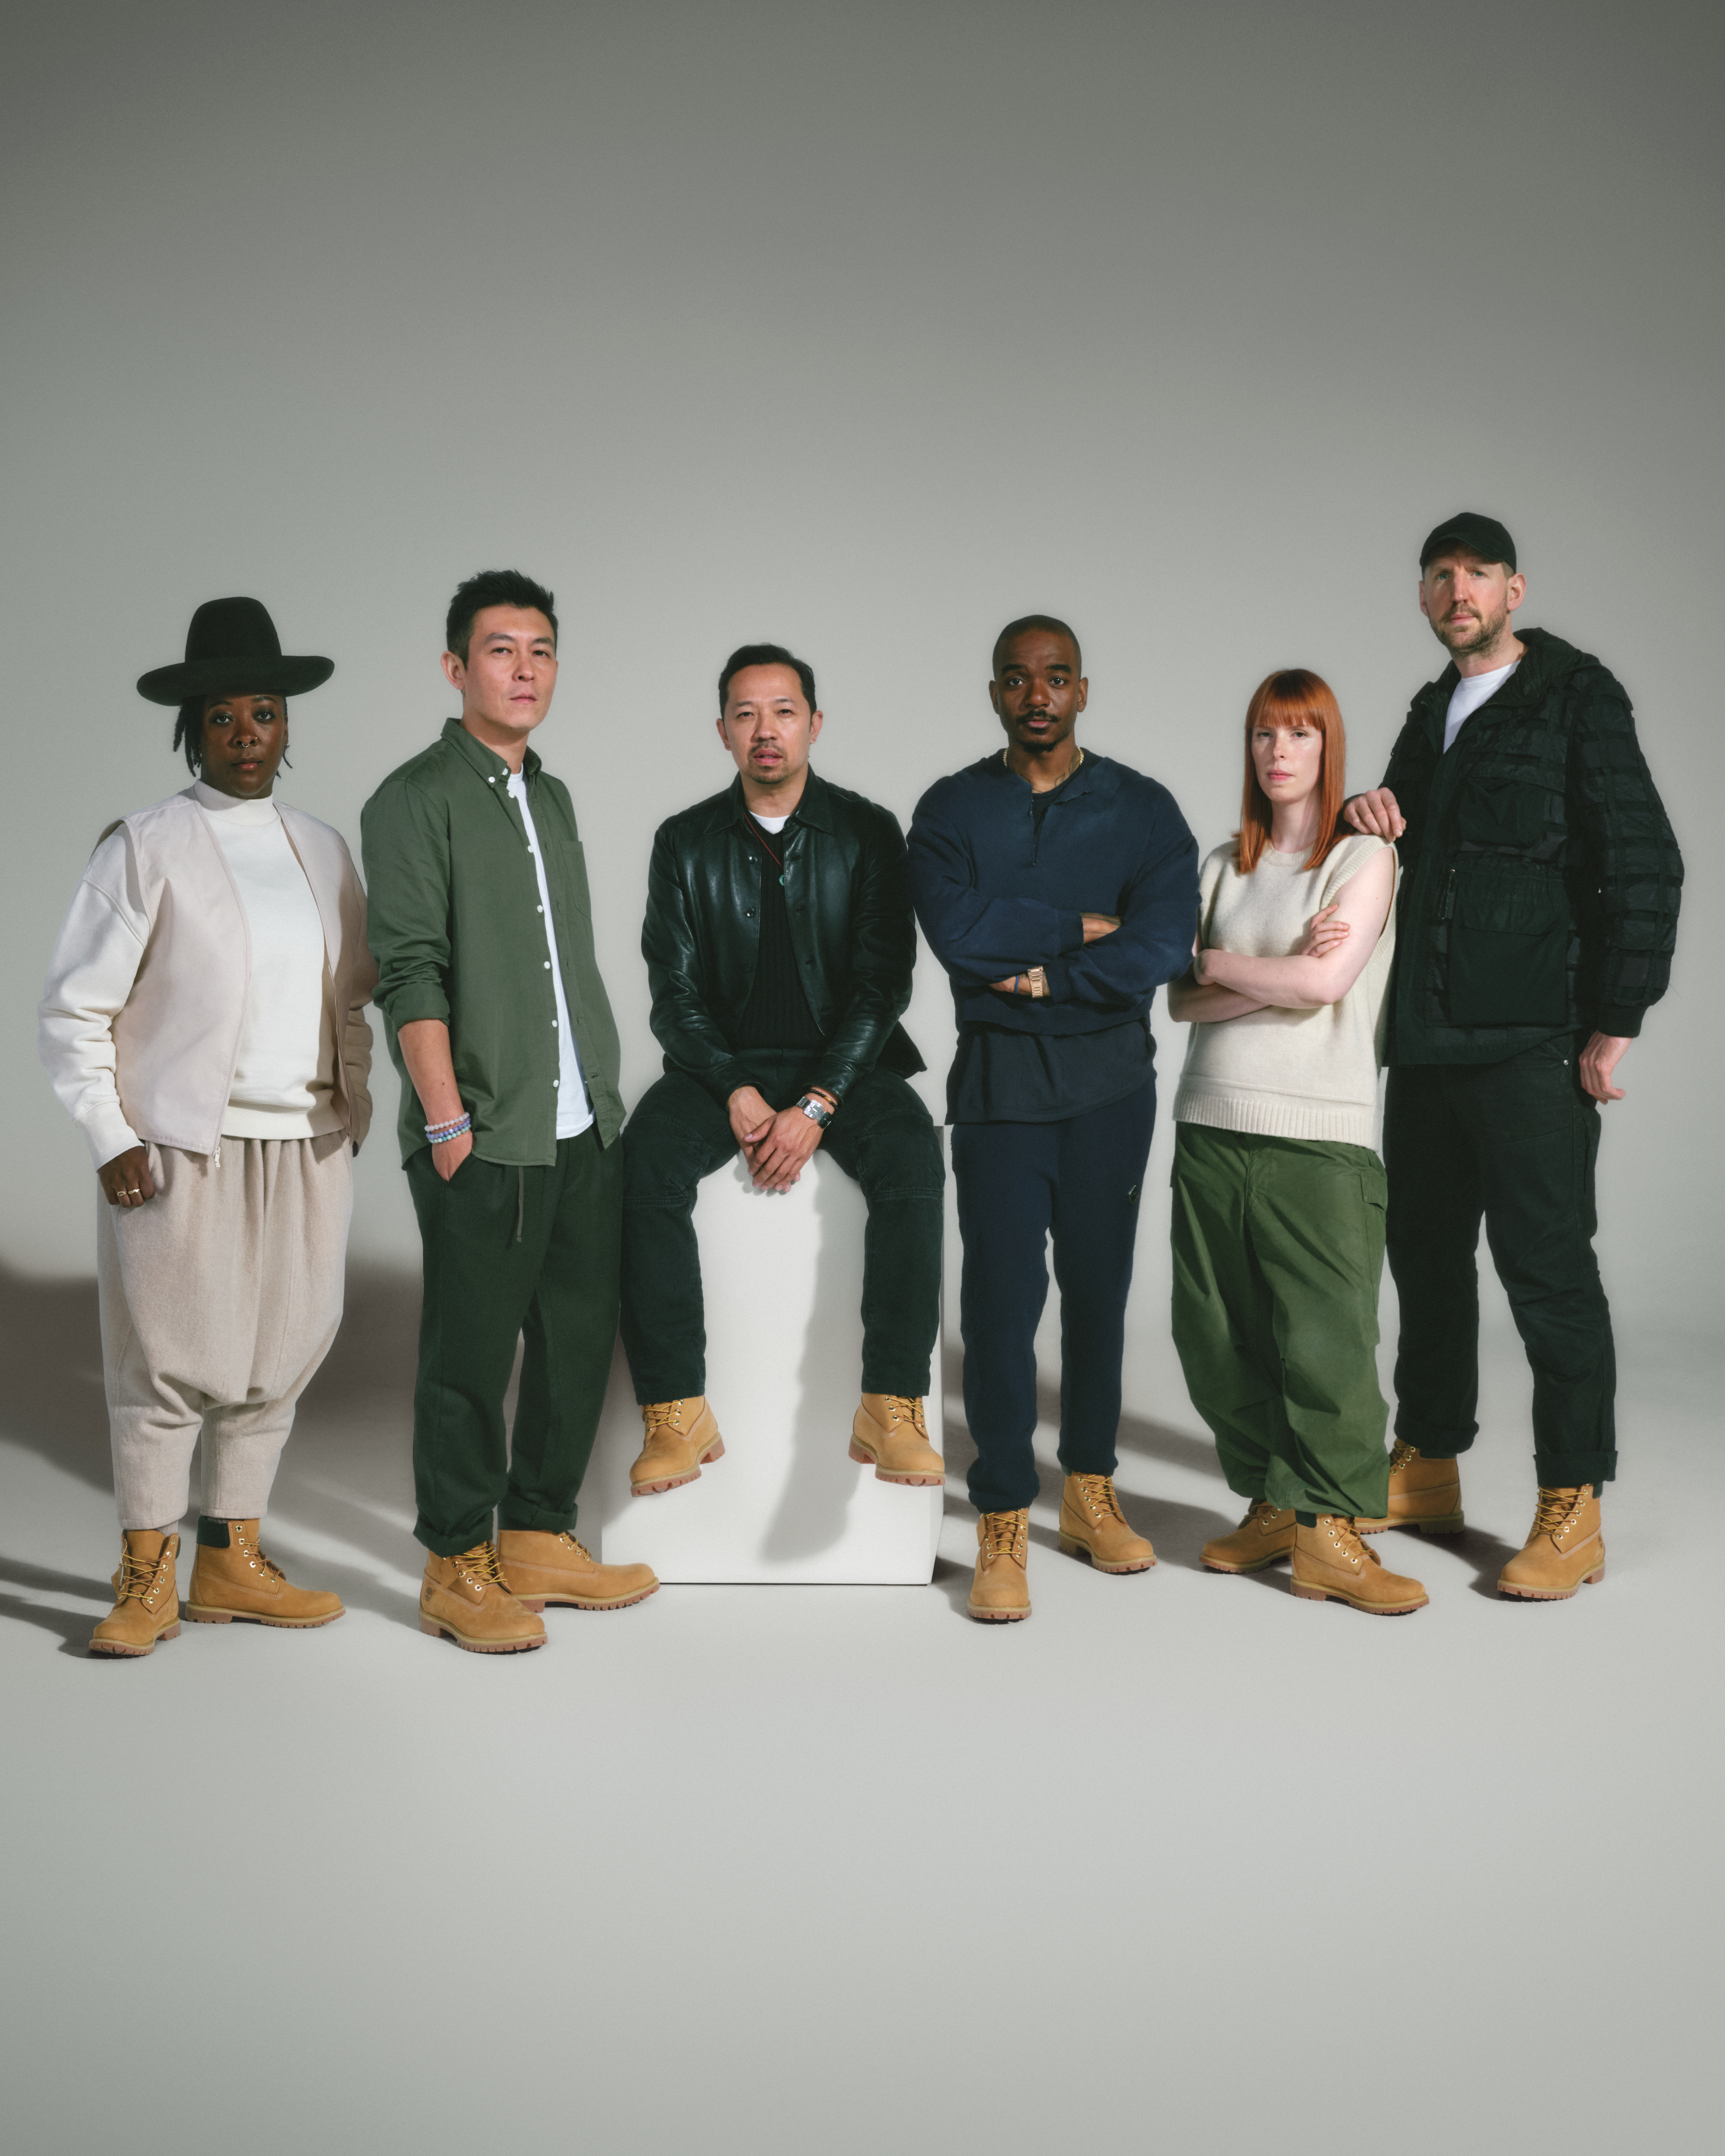 Launch Decades Marks Timberland® | Wire With of of Original Timberland Five Future73 Business the Boot